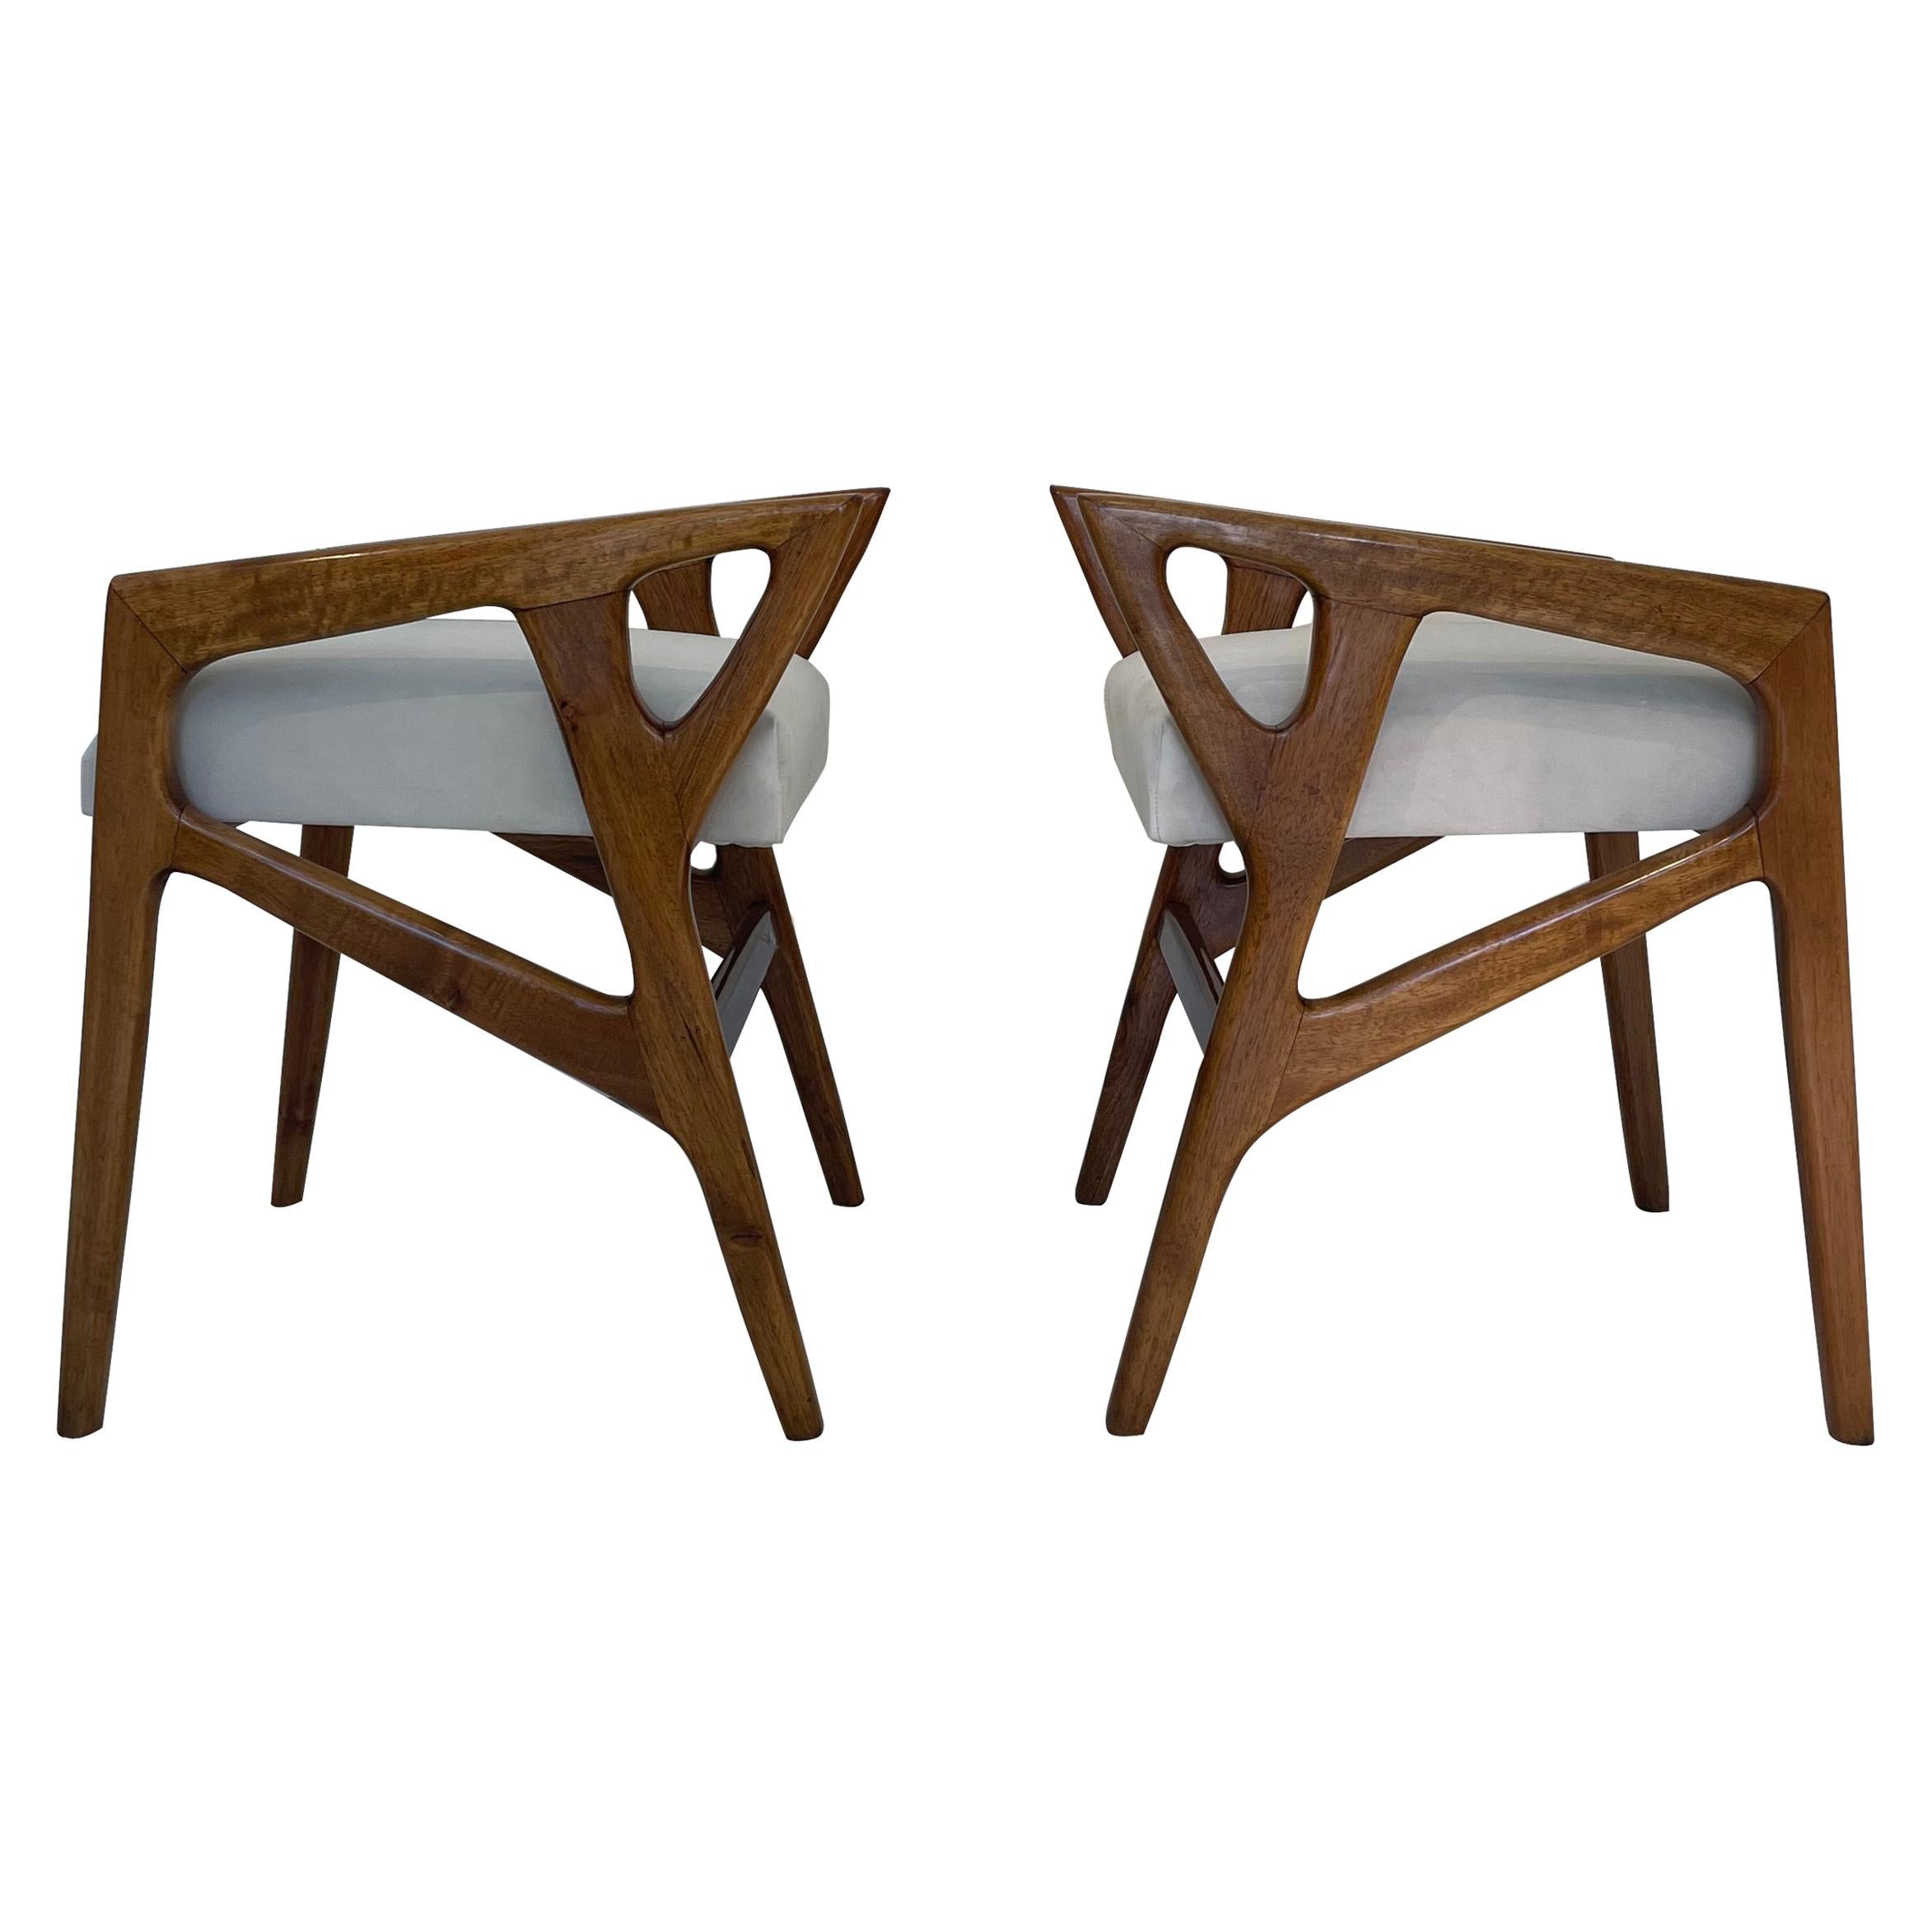 Gio Ponti Pair Of Stools Walnut Wood White Seat Italy 1953 Excellent Patina